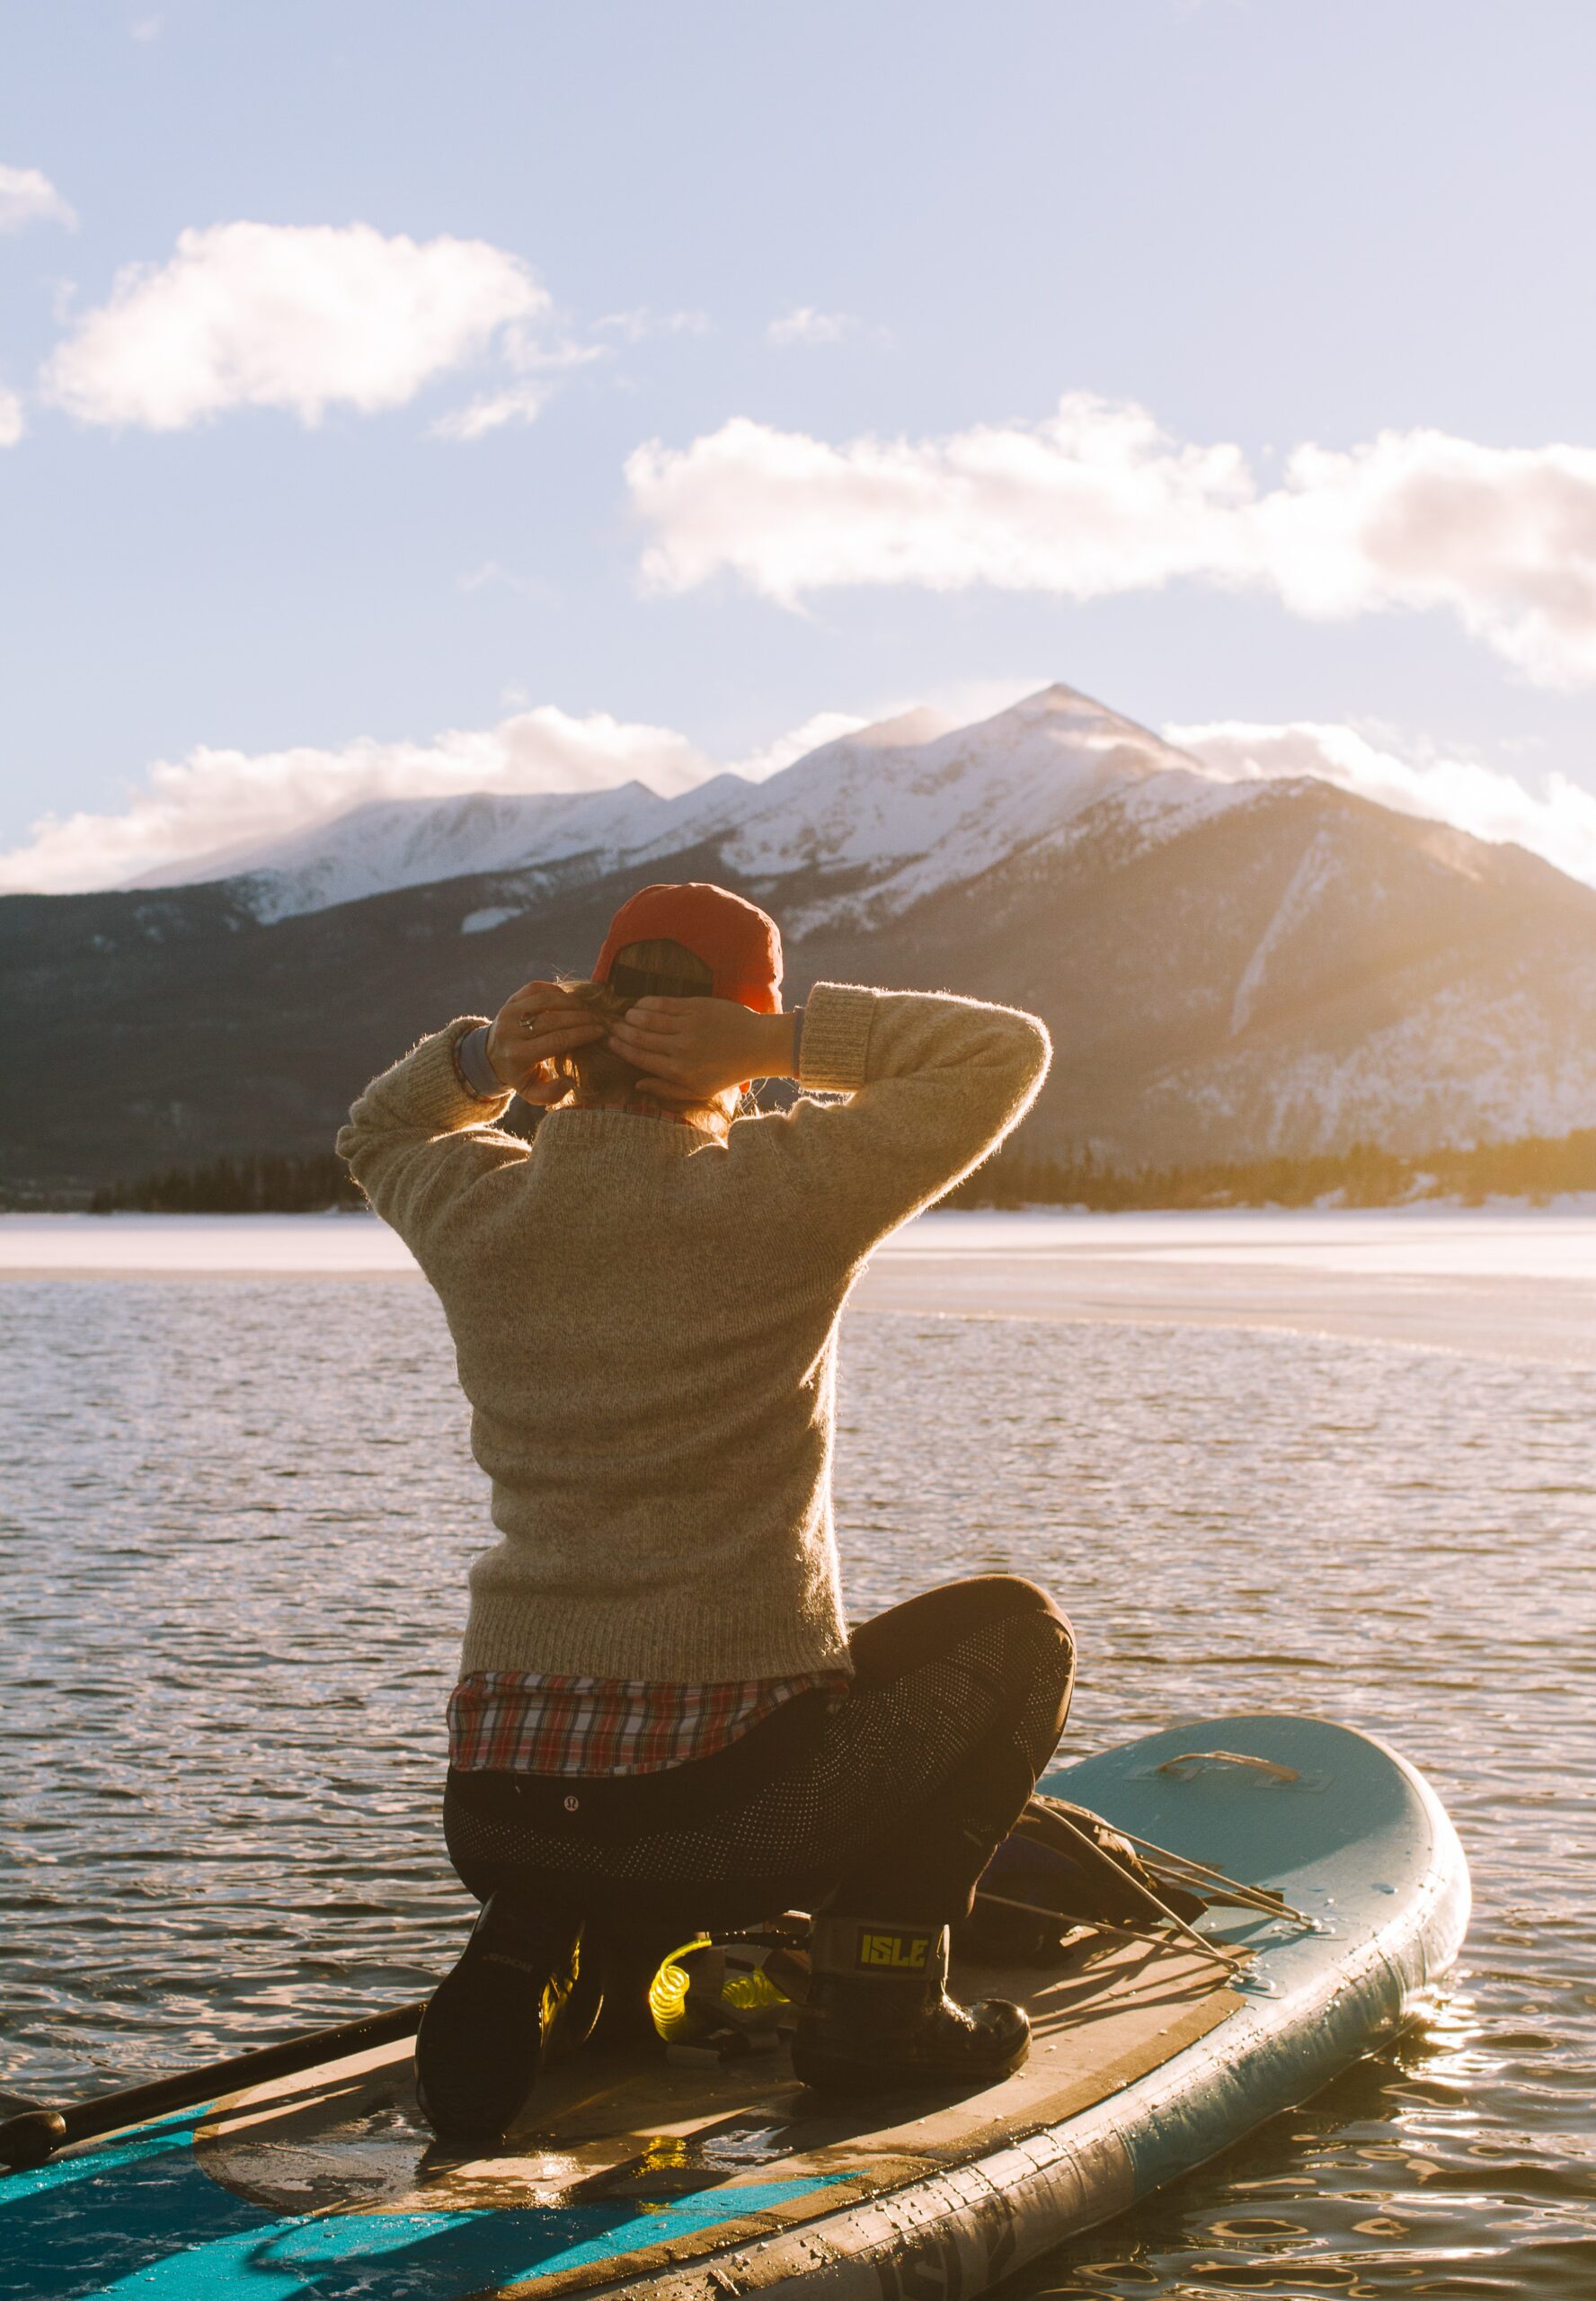 A woman on a paddleboard at sea, admiring the sunrise over snowy mountains.